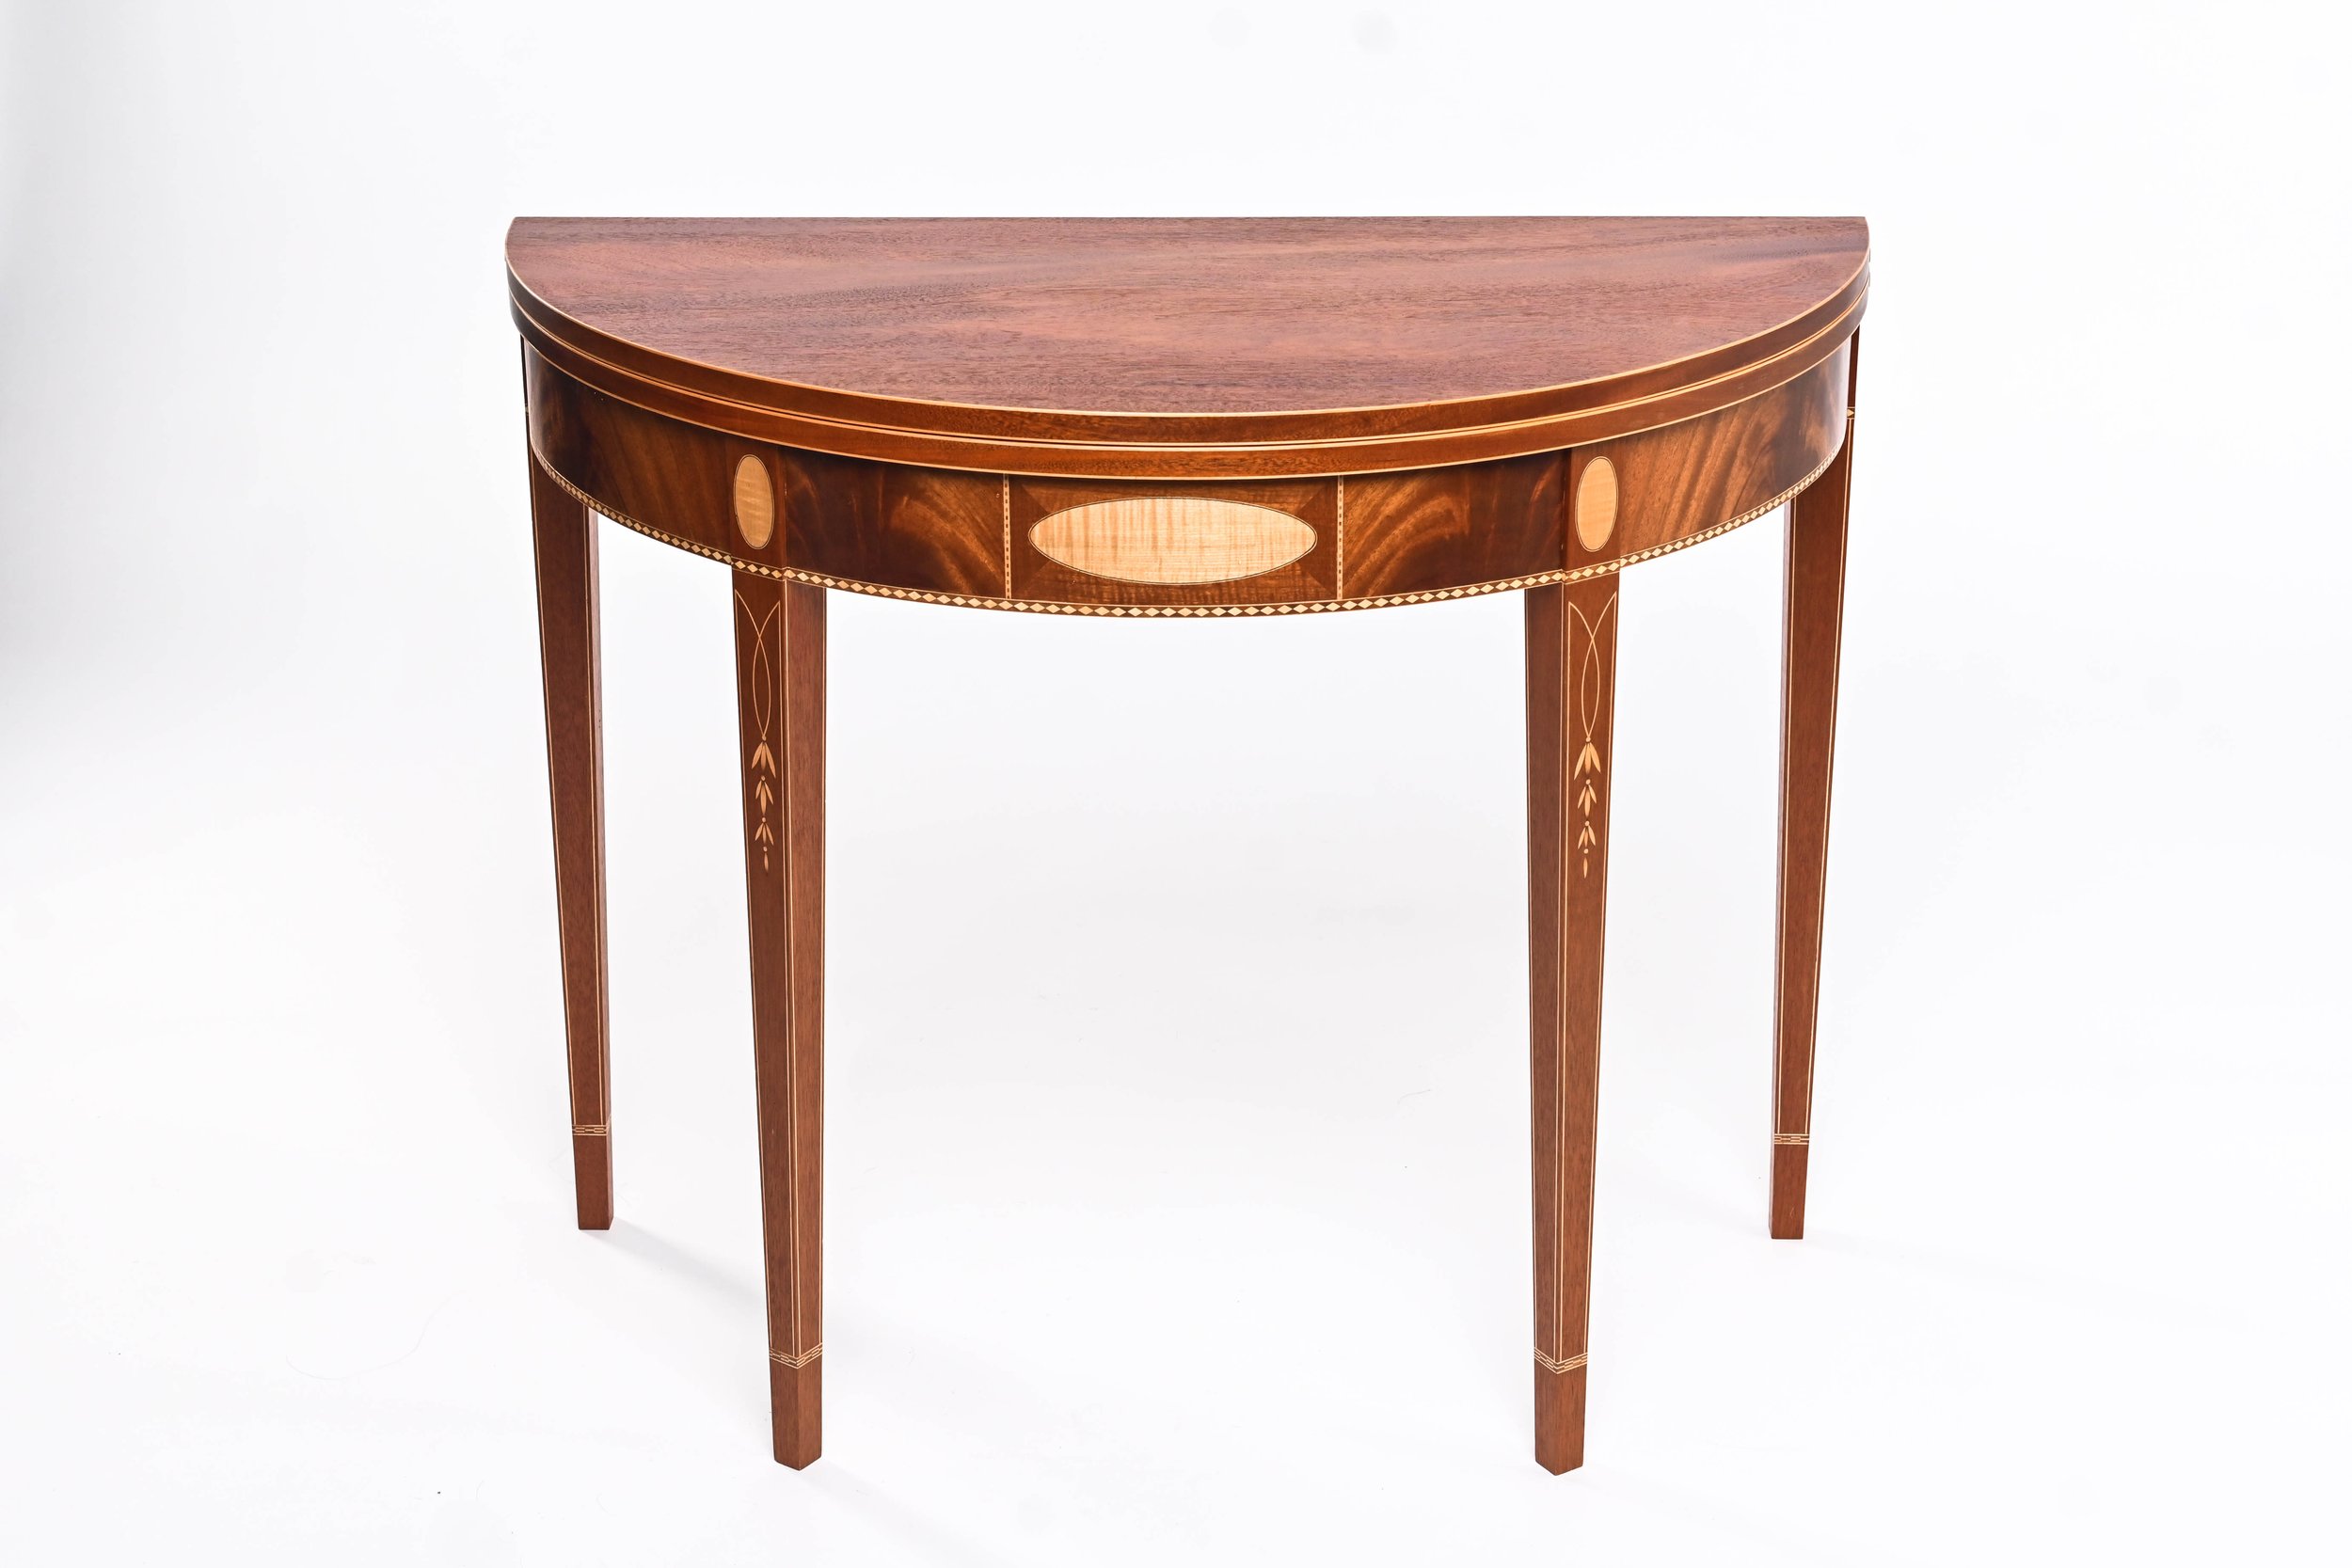 Federal Demilune Card Table, front/top view